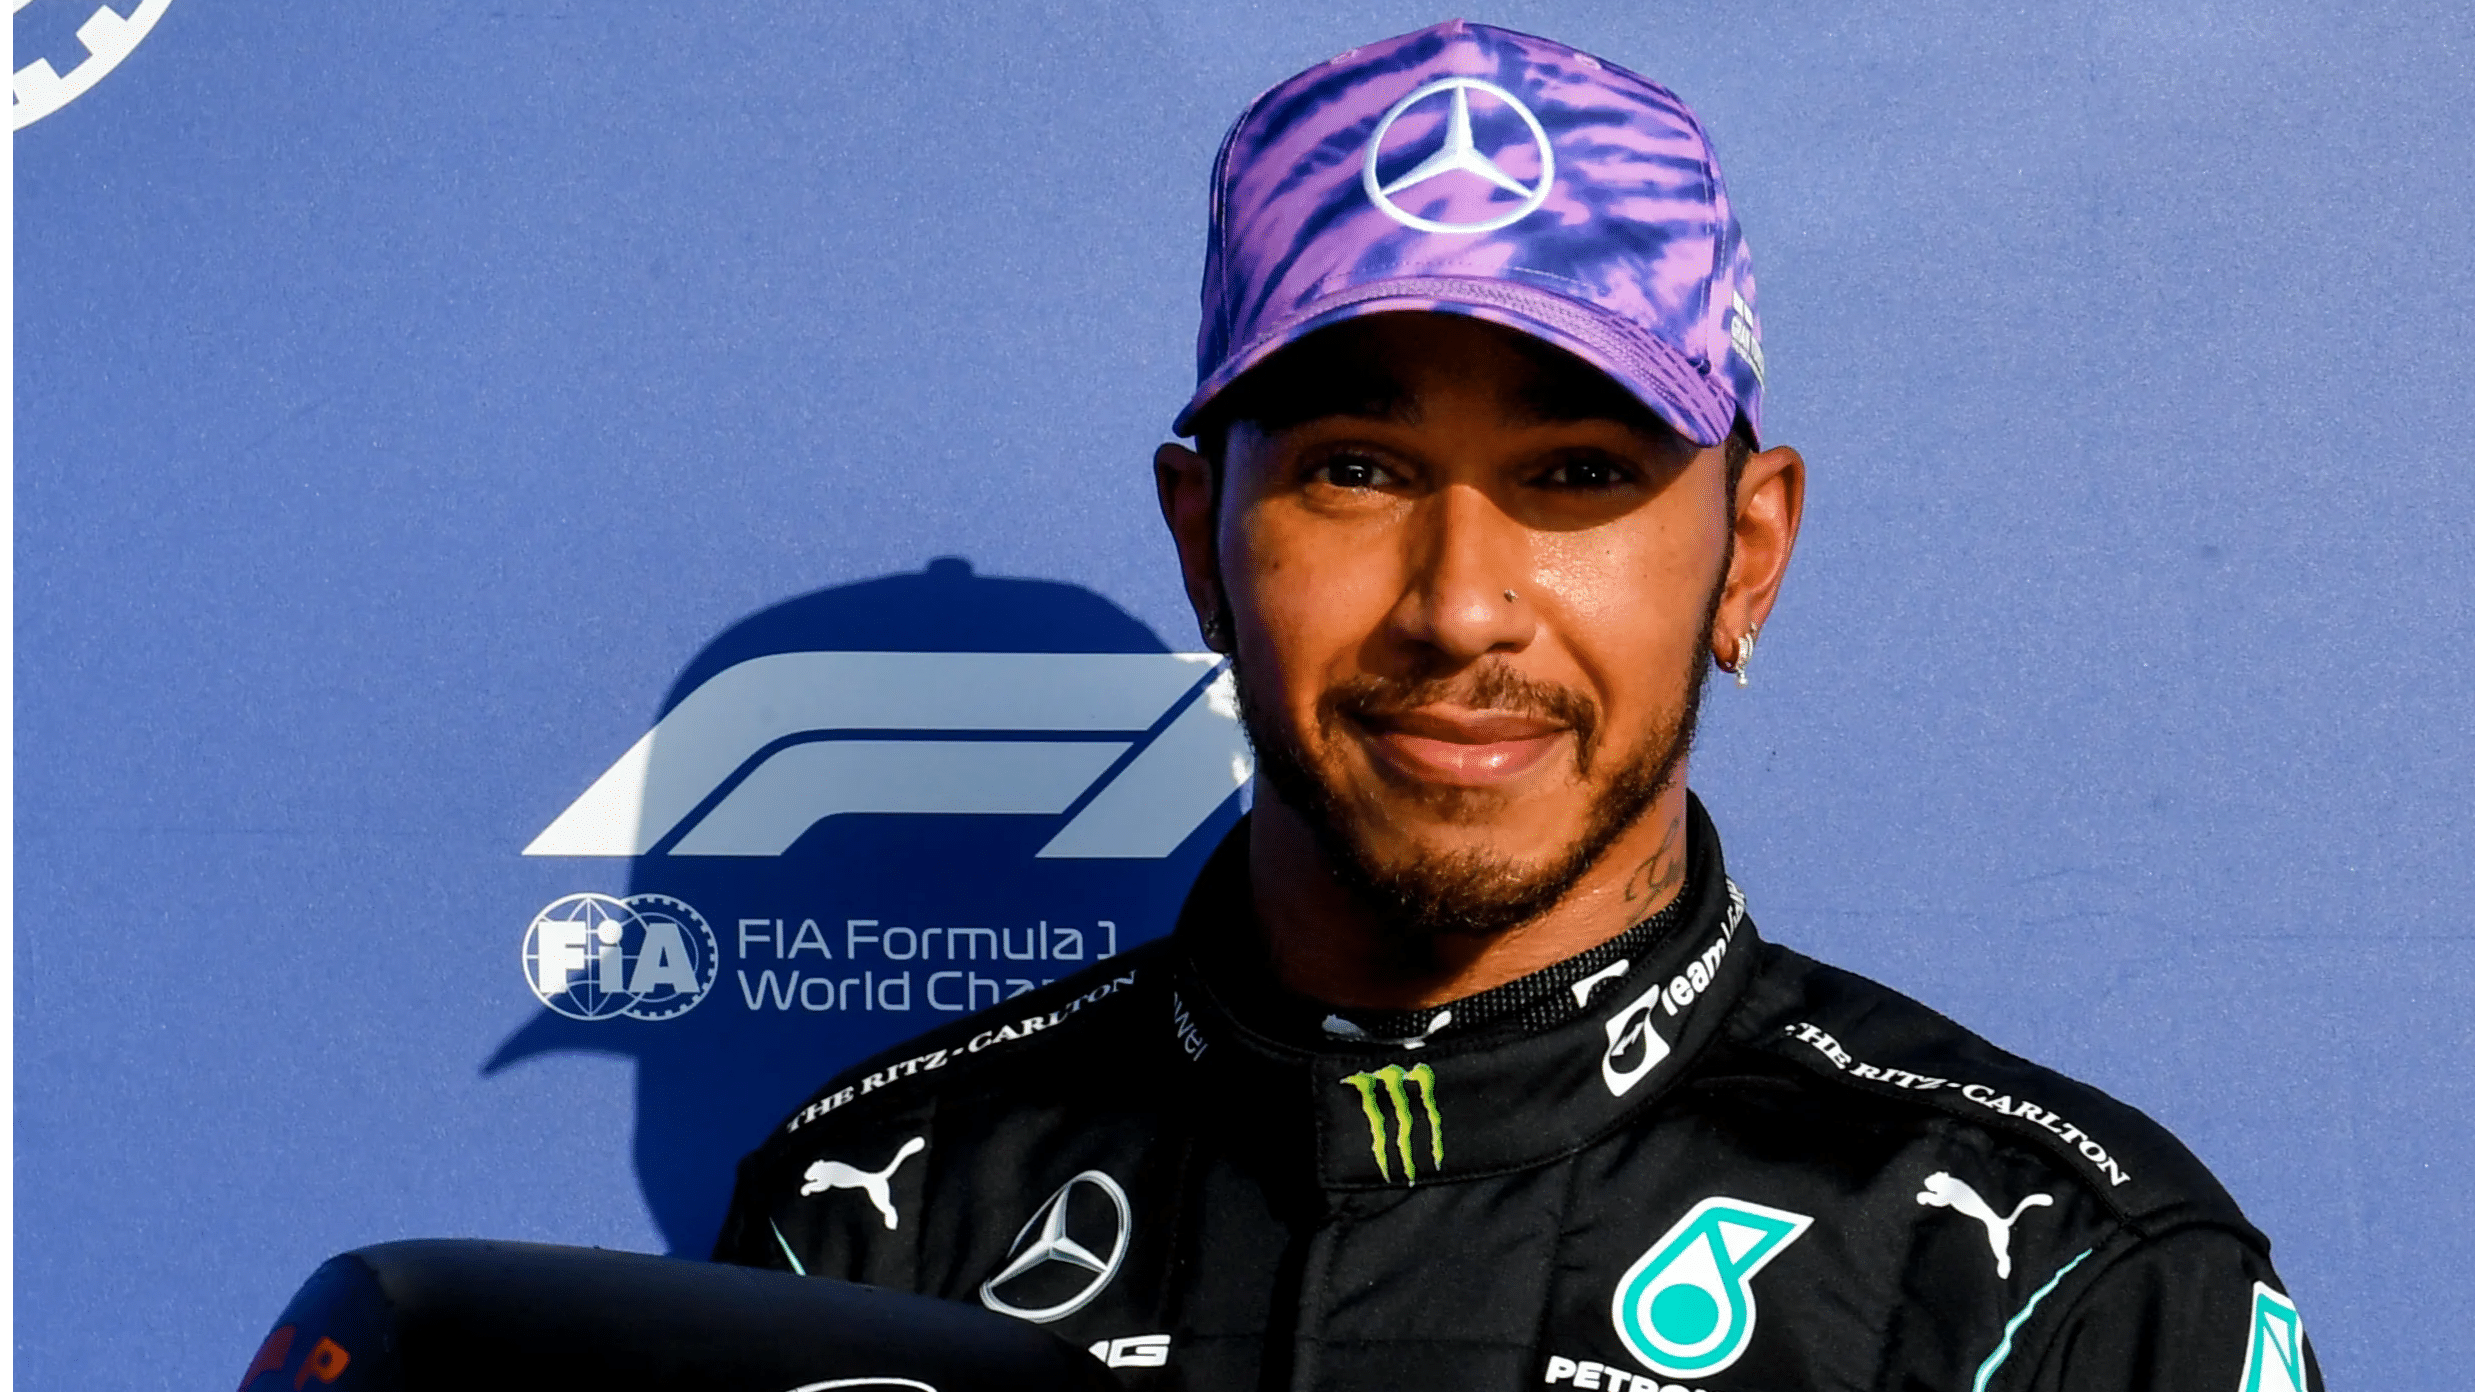 Hamilton tops British GP qualifying, but criticism of the new format continues